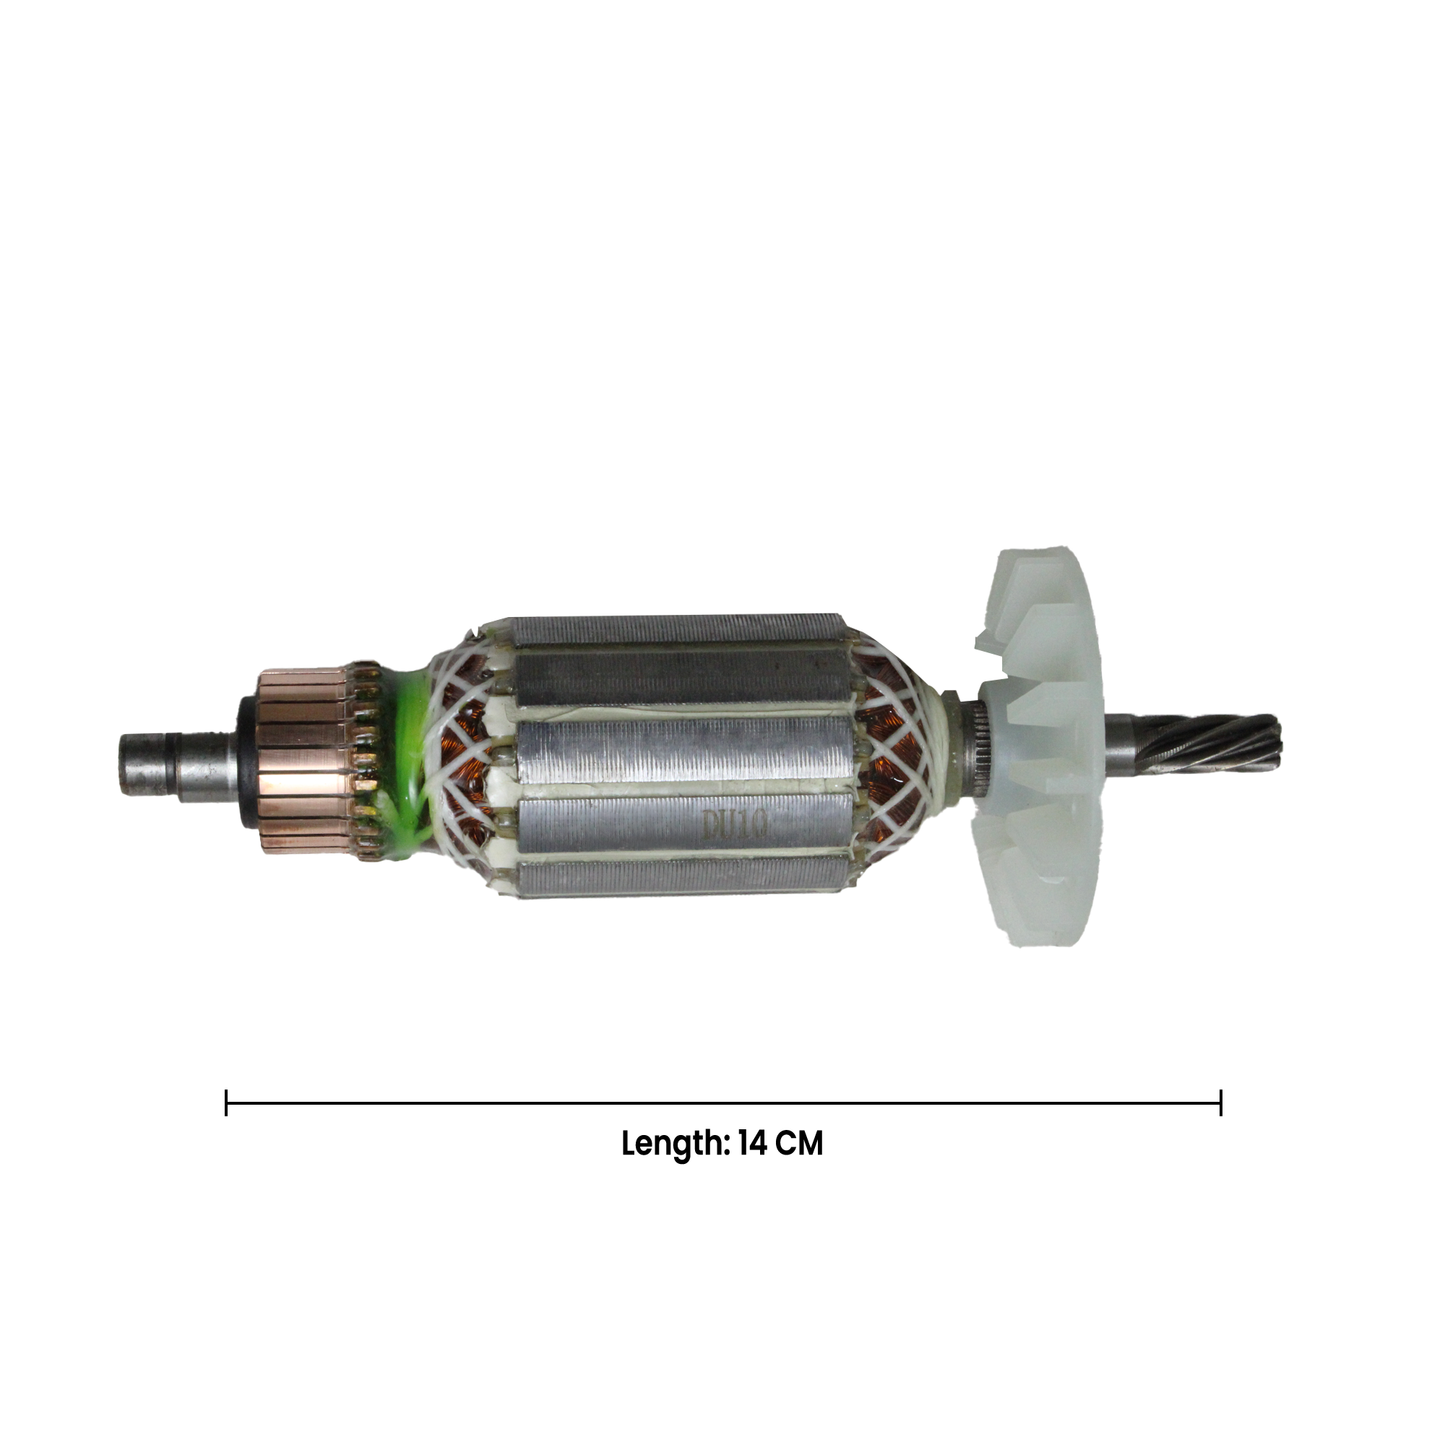 AEGON ACWFDU10 Copper Armature for 10mm Drill Machines - Compatible with Aegon AD10 and Generic Models